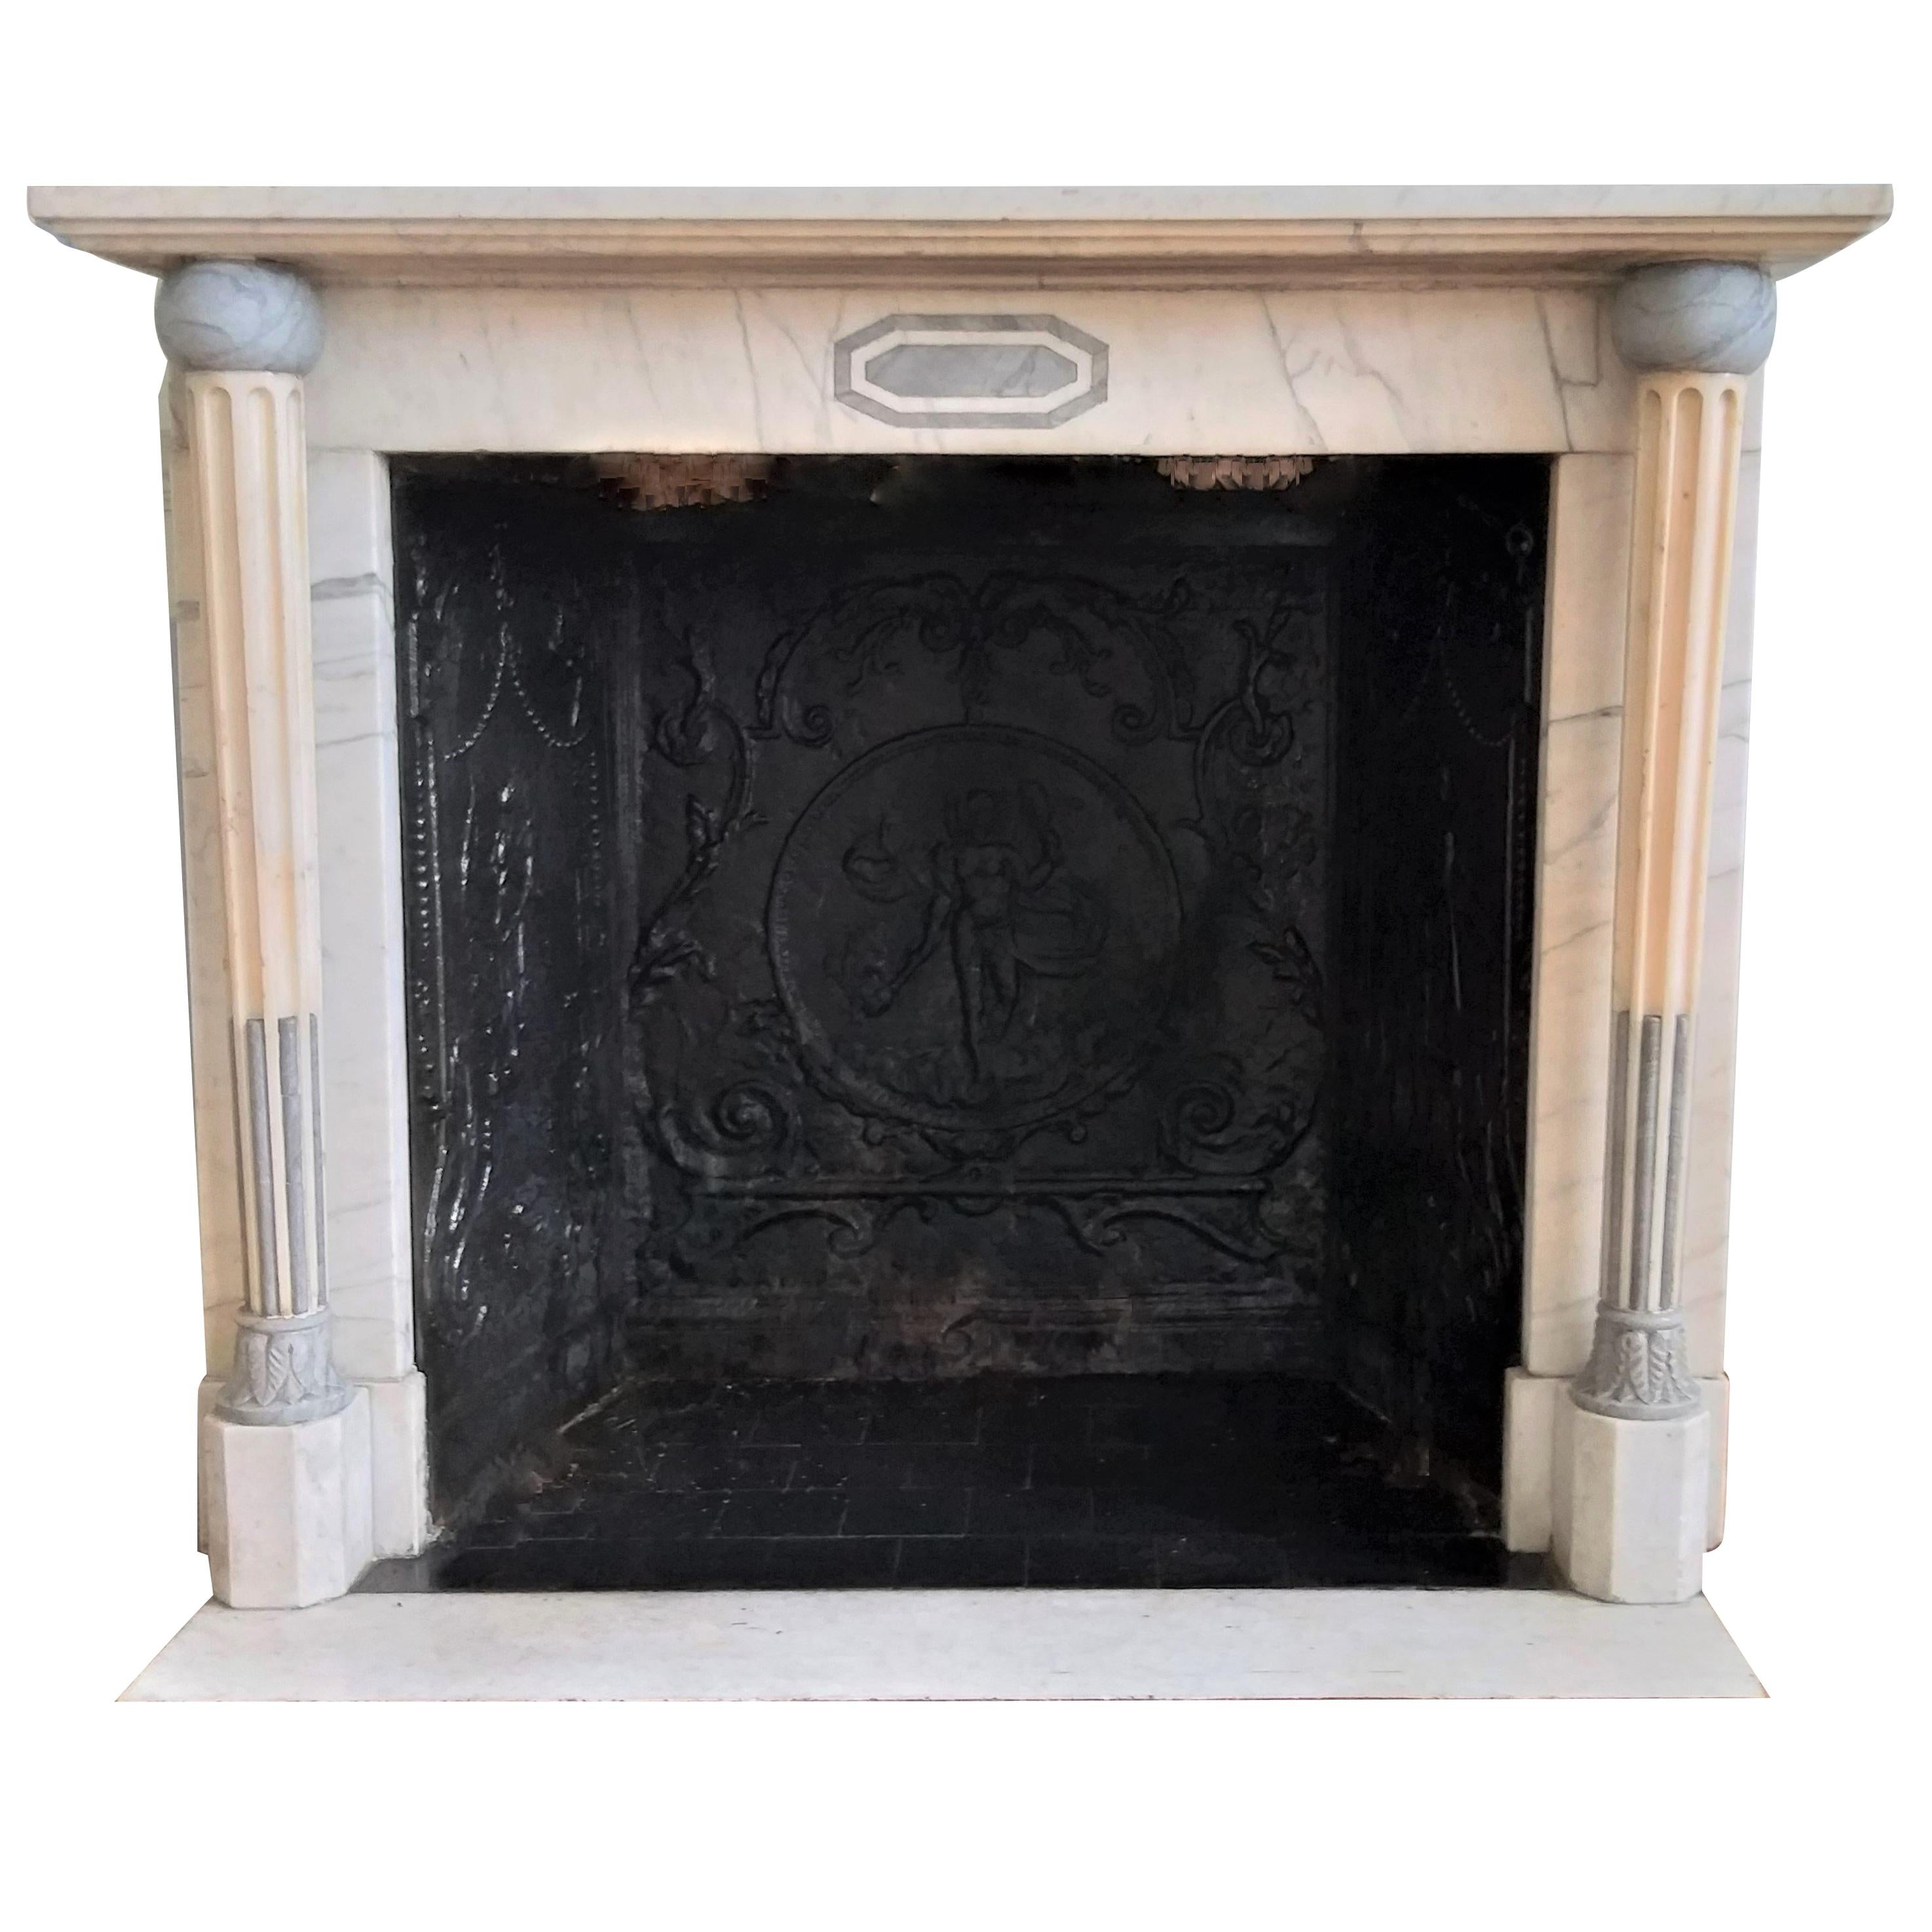  EMPIRE Marble Fireplace Epoque  For Sale